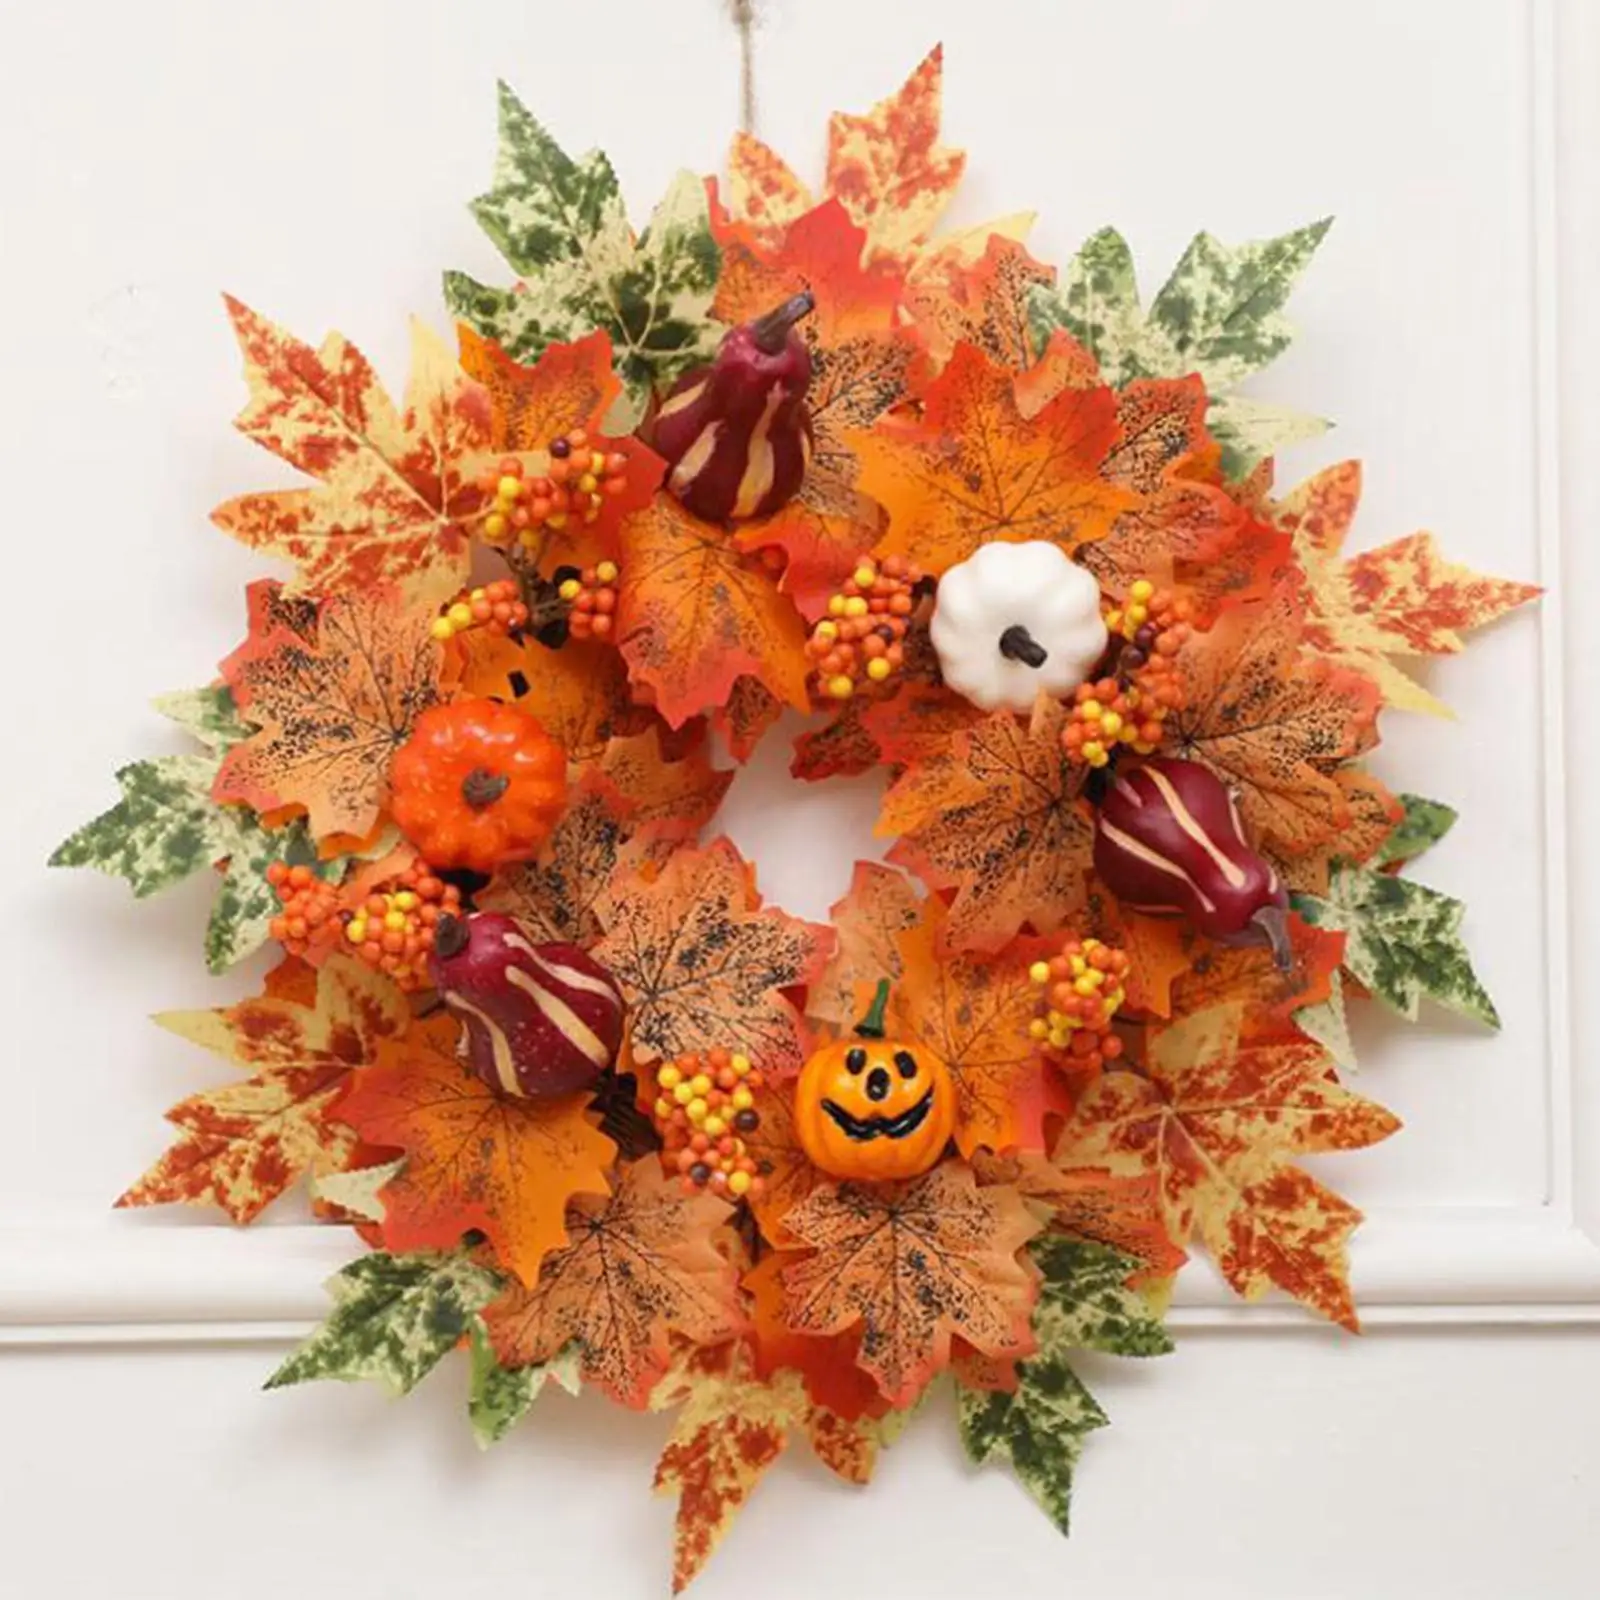 Fall Wreath Hanging with Pumpkins Autumn Wreath for Festival Party Halloween